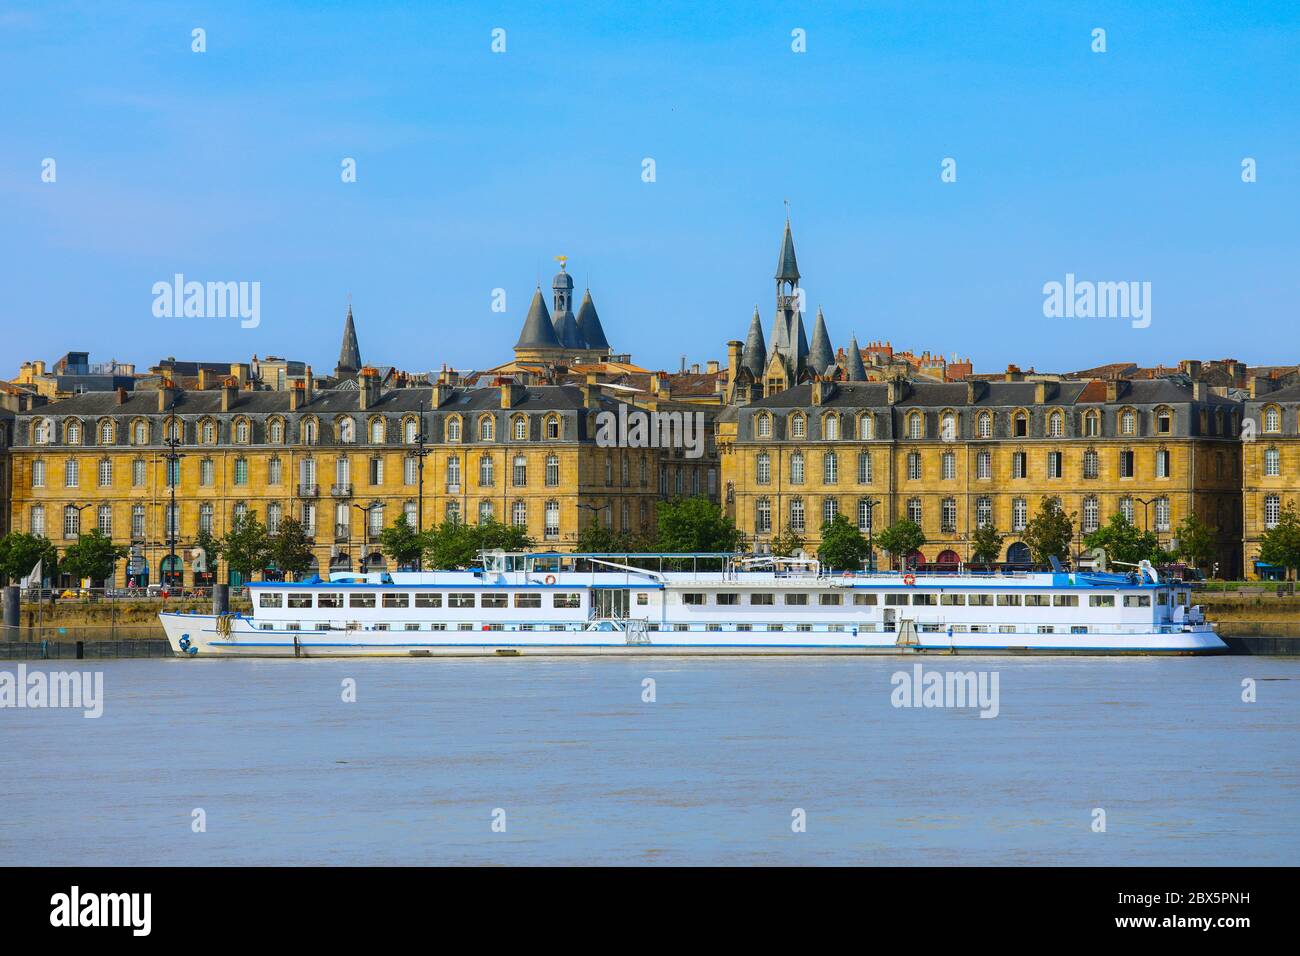 View of the old town in bordeaux city, typical, buildings from the other side of Garonne River, Bordeaux, France Stock Photo